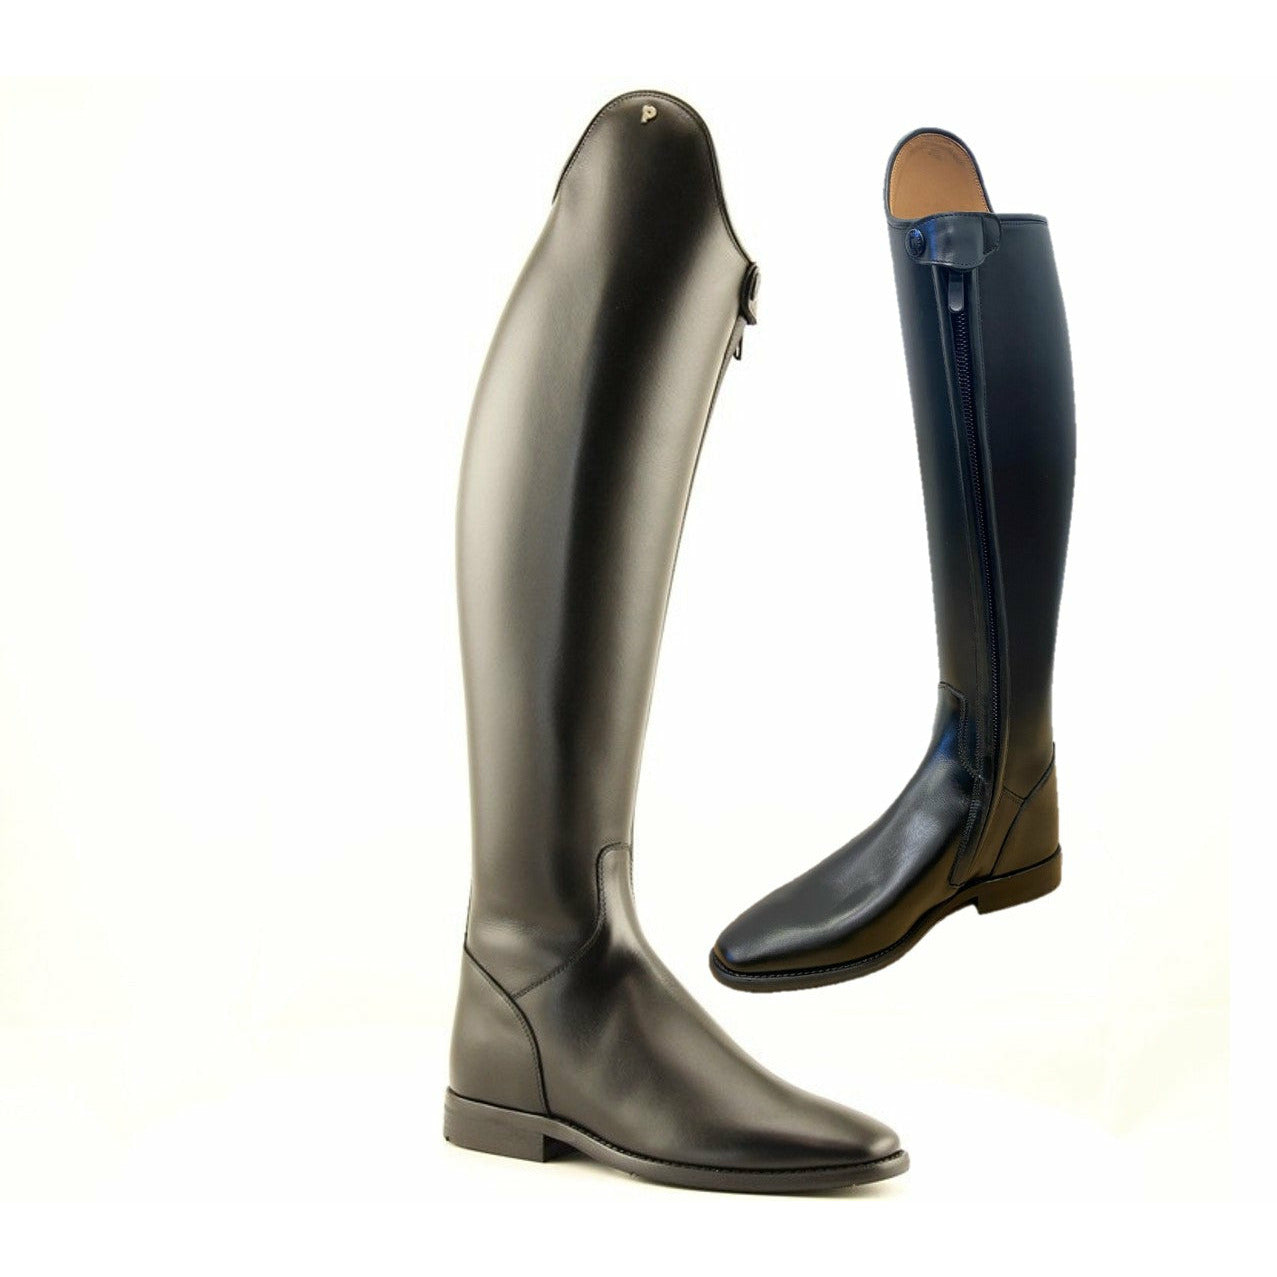 Petrie Bergamo Boots - we have some in stock but most sizes are to order